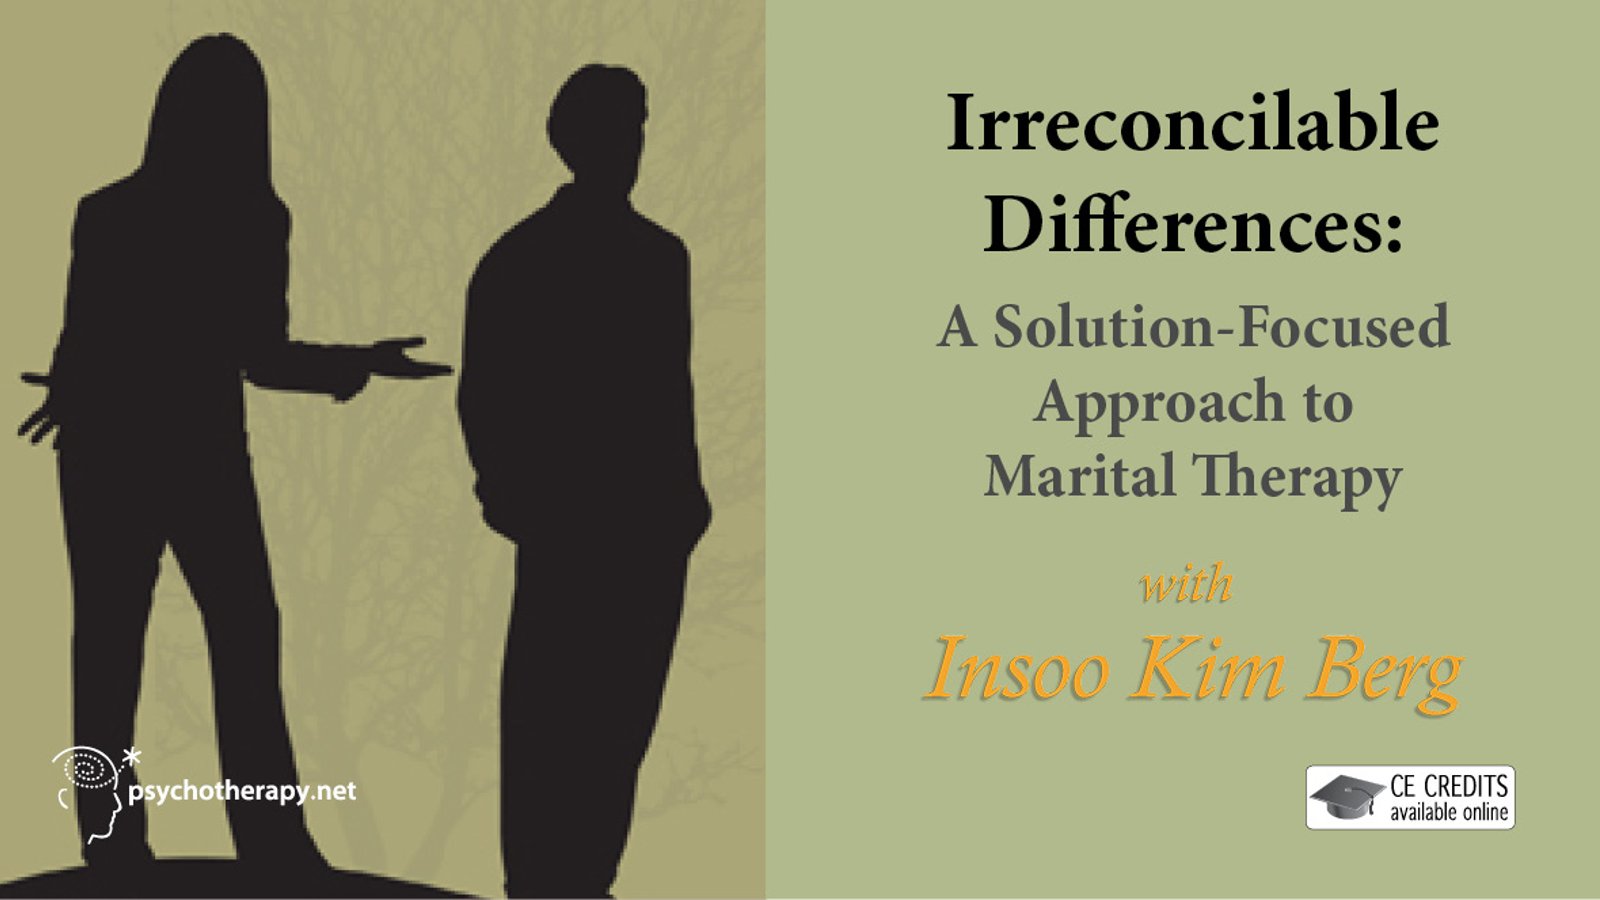 Irreconcilable Differences - A Solution-Focused Approach to Marital Therapy with Insoo Kim Berg